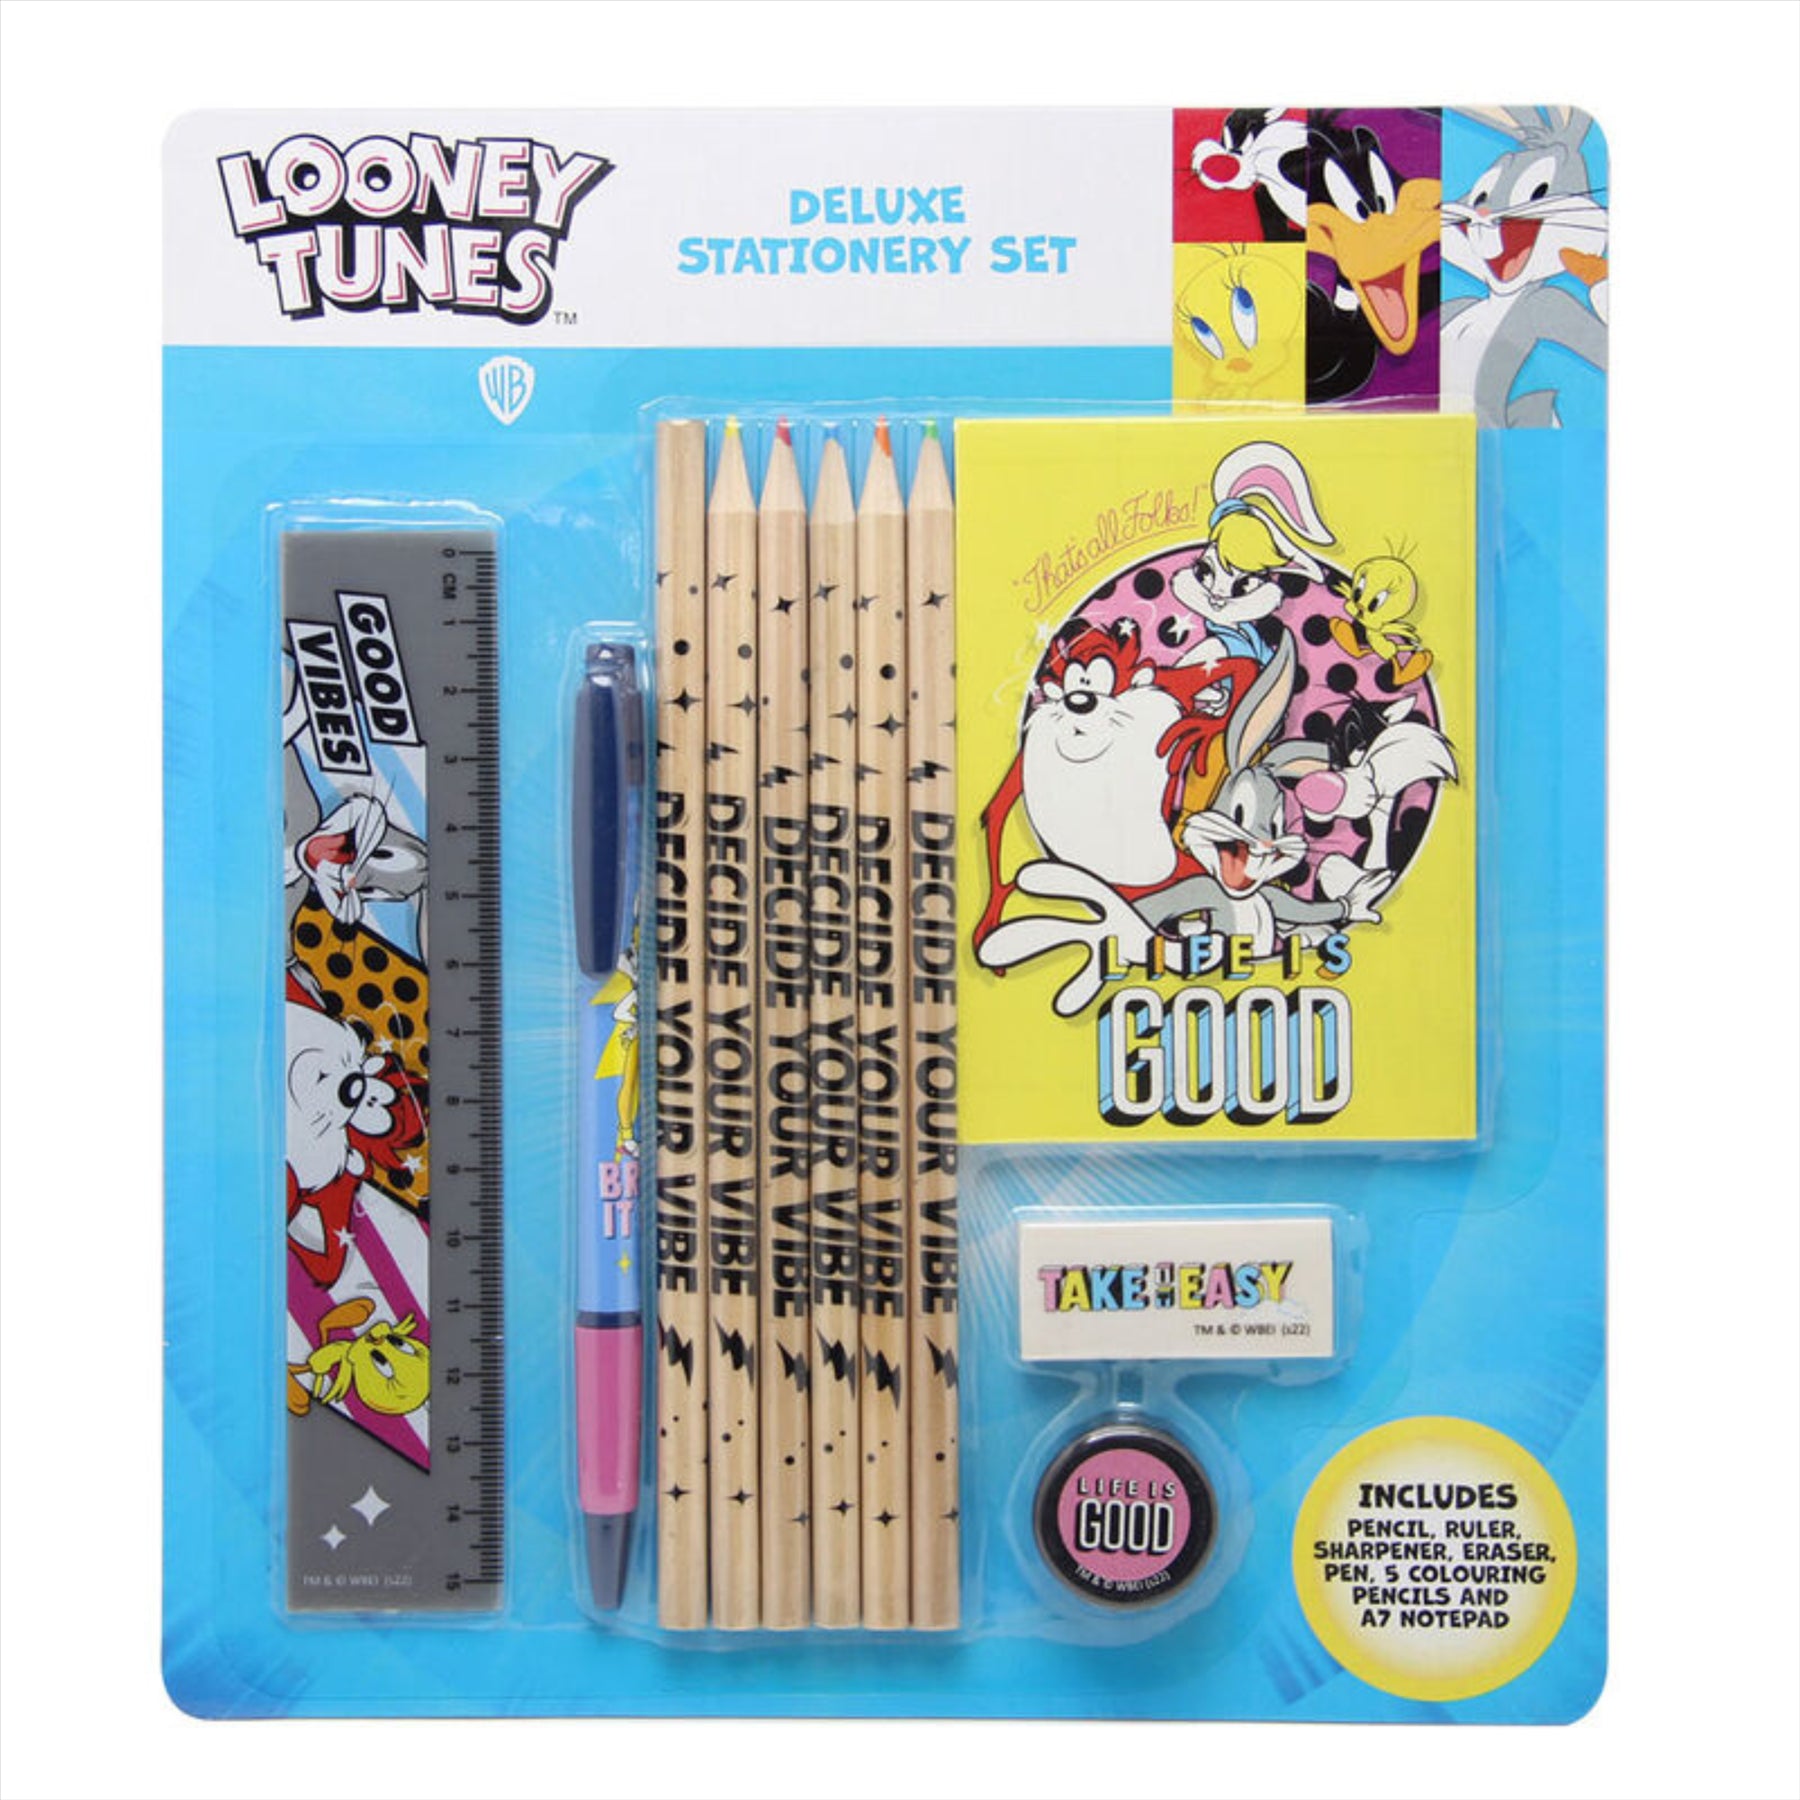 Looney Tunes Deluxe School Stationery Set - Includes Pens, Colouring Pencils, Ruler, and Eraser